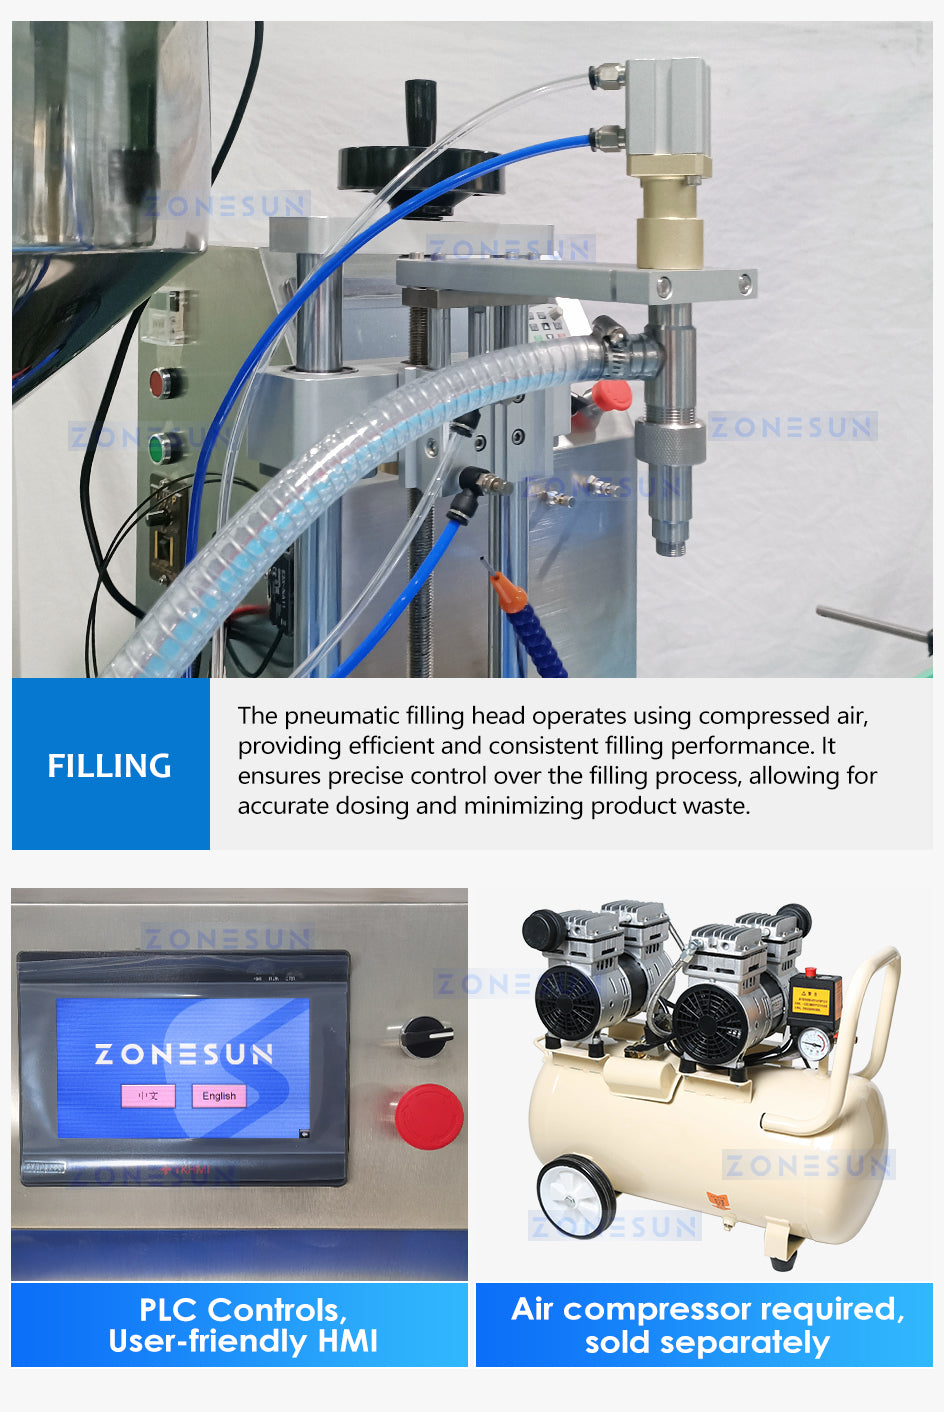 ZONESUN Automatic Water Circulation System Cosmetic Filling Machine ZS-WCHJ1C